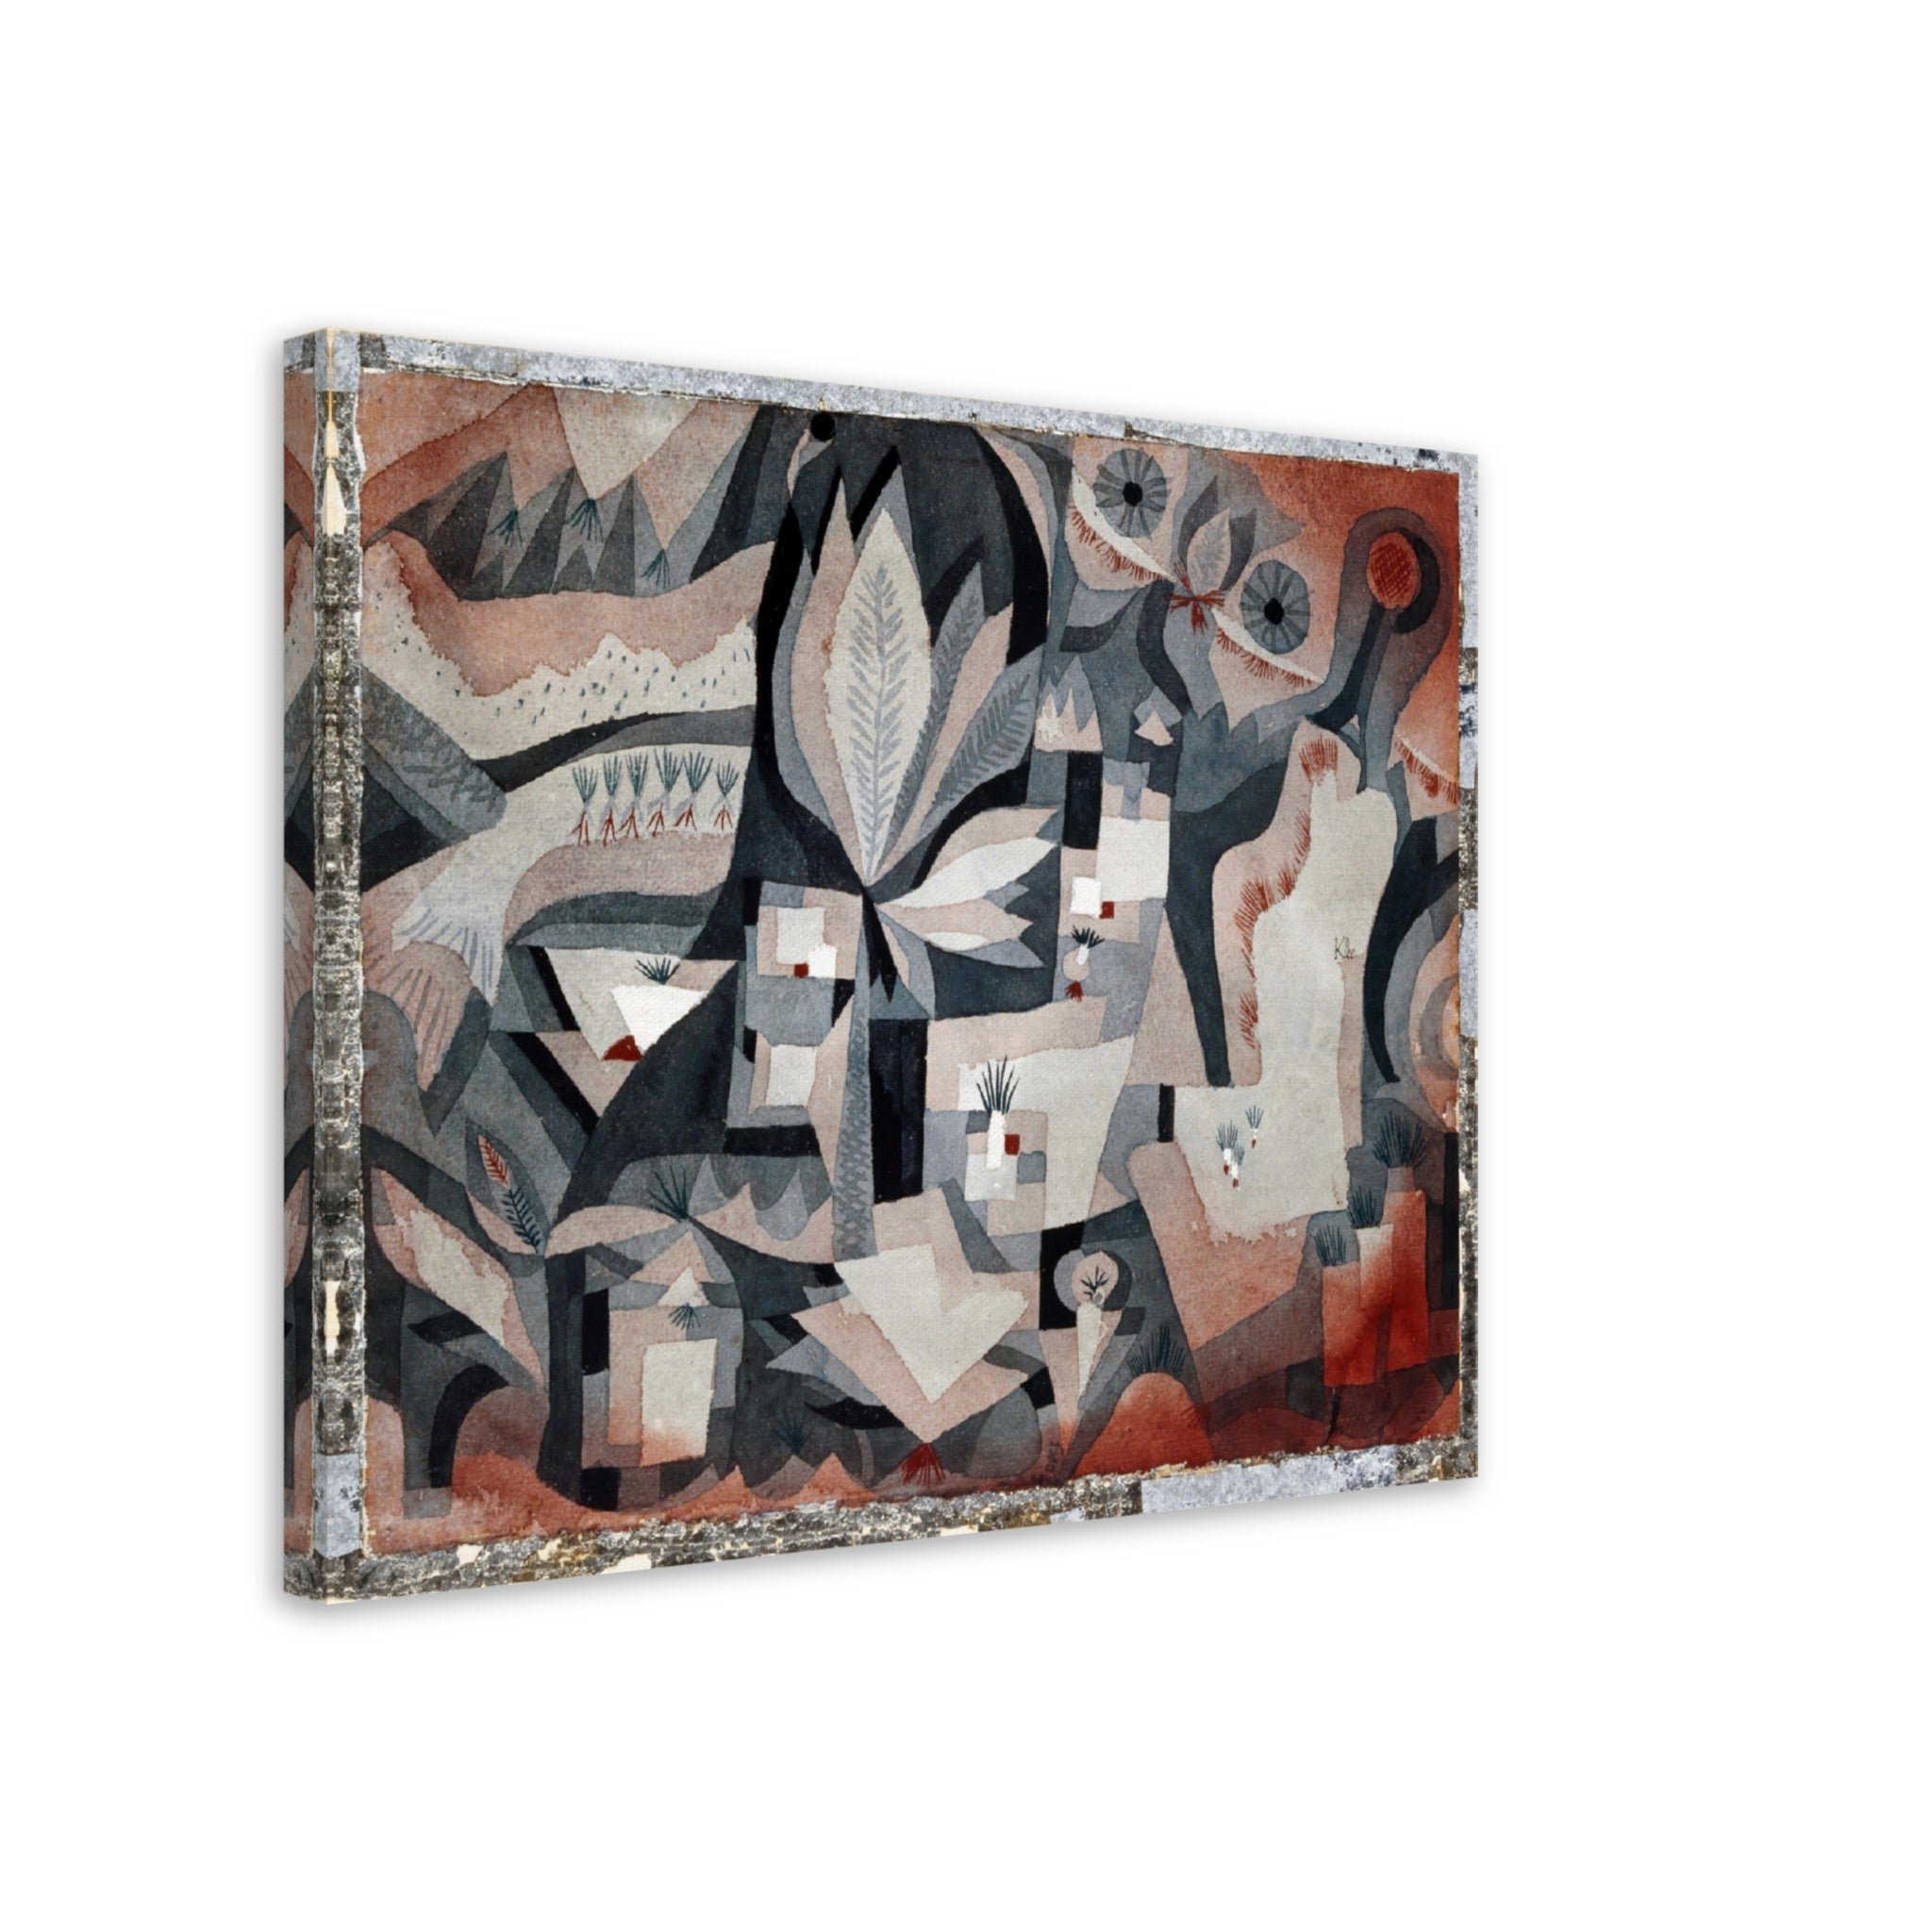 Paul Klee Dry Cooler Canvas Print, Abstract Art Canvas, Paul Klee Canvass - WallArtPrints4U